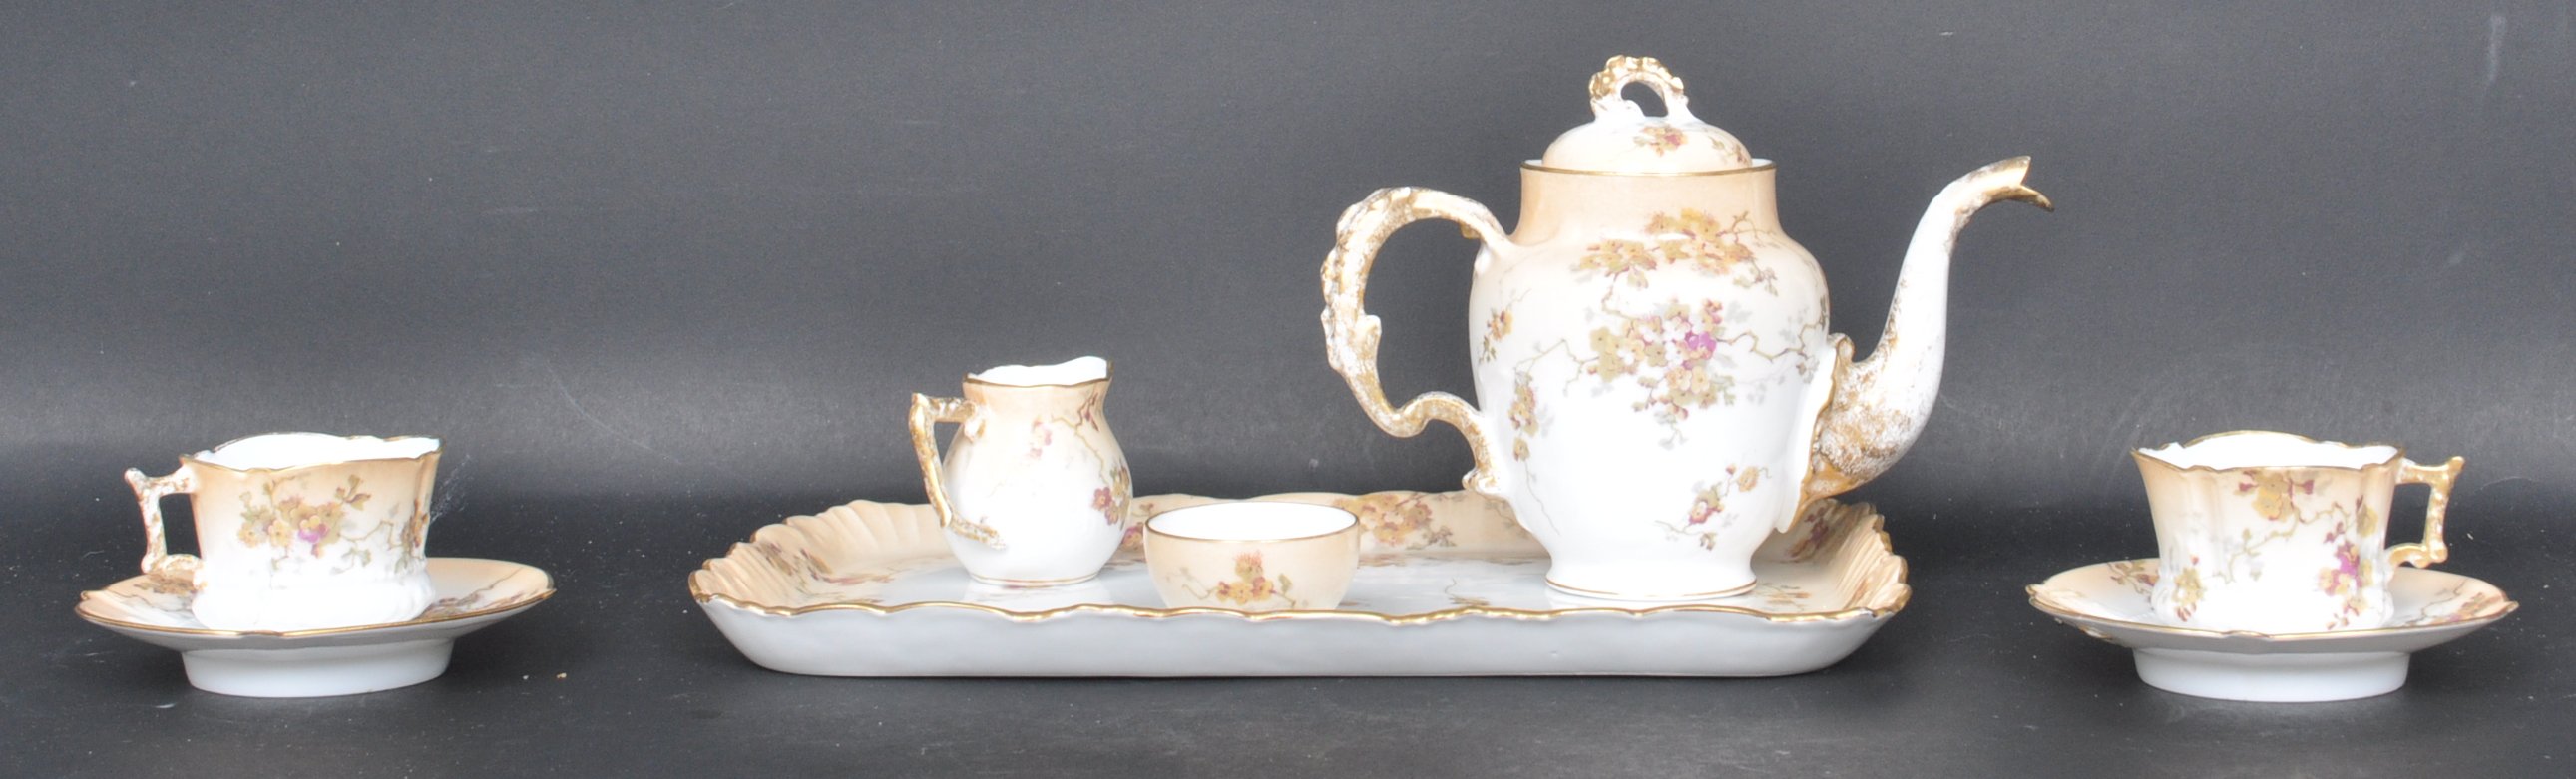 CIRCA 1900 LIMOGES 'TEA FOR TWO' CHINA SERVICE - Image 3 of 6